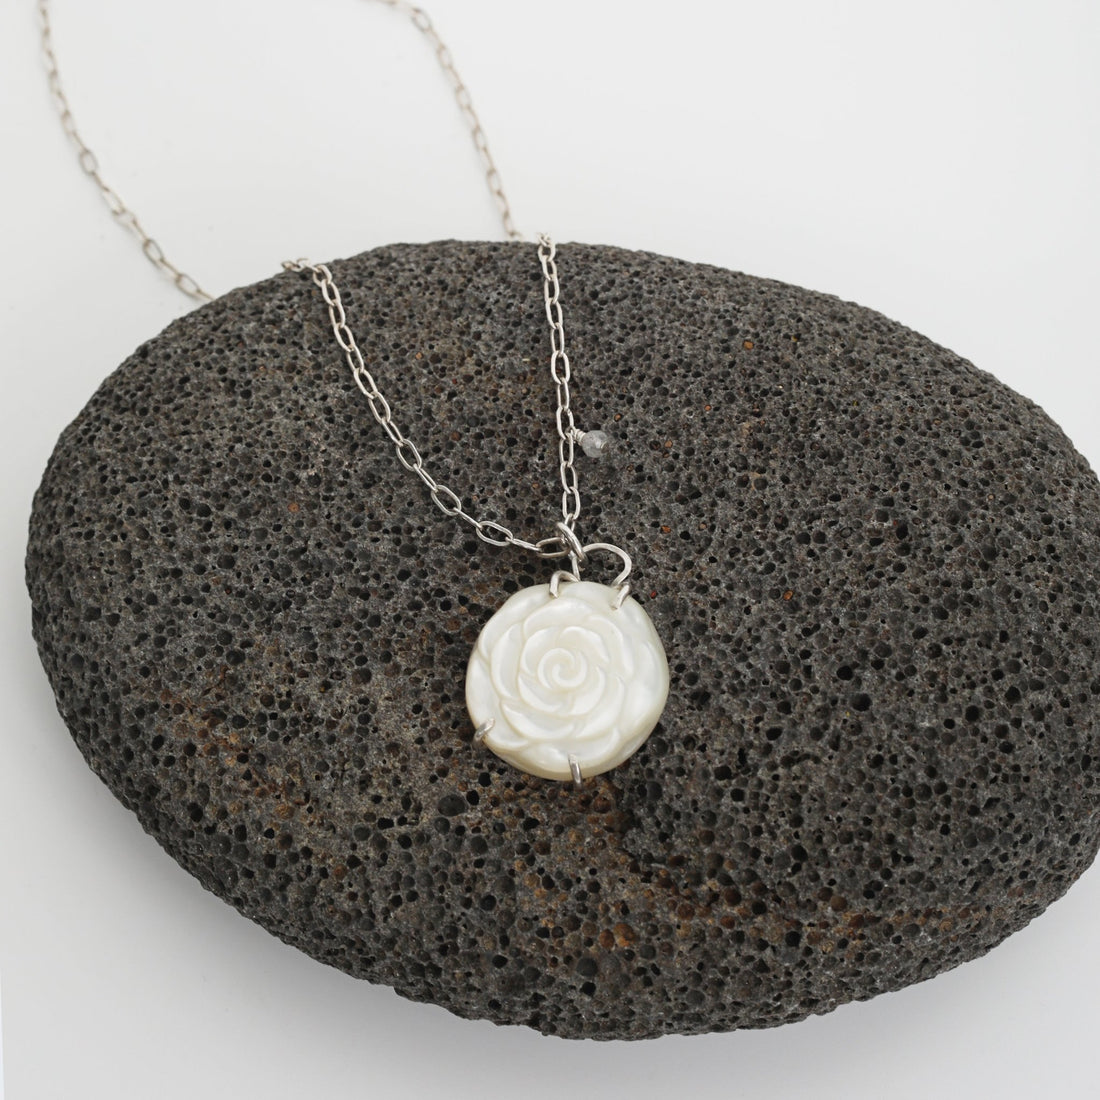 "The White Rose" Carved Mother of Pearl Flower Necklace - Chocolate and Steel